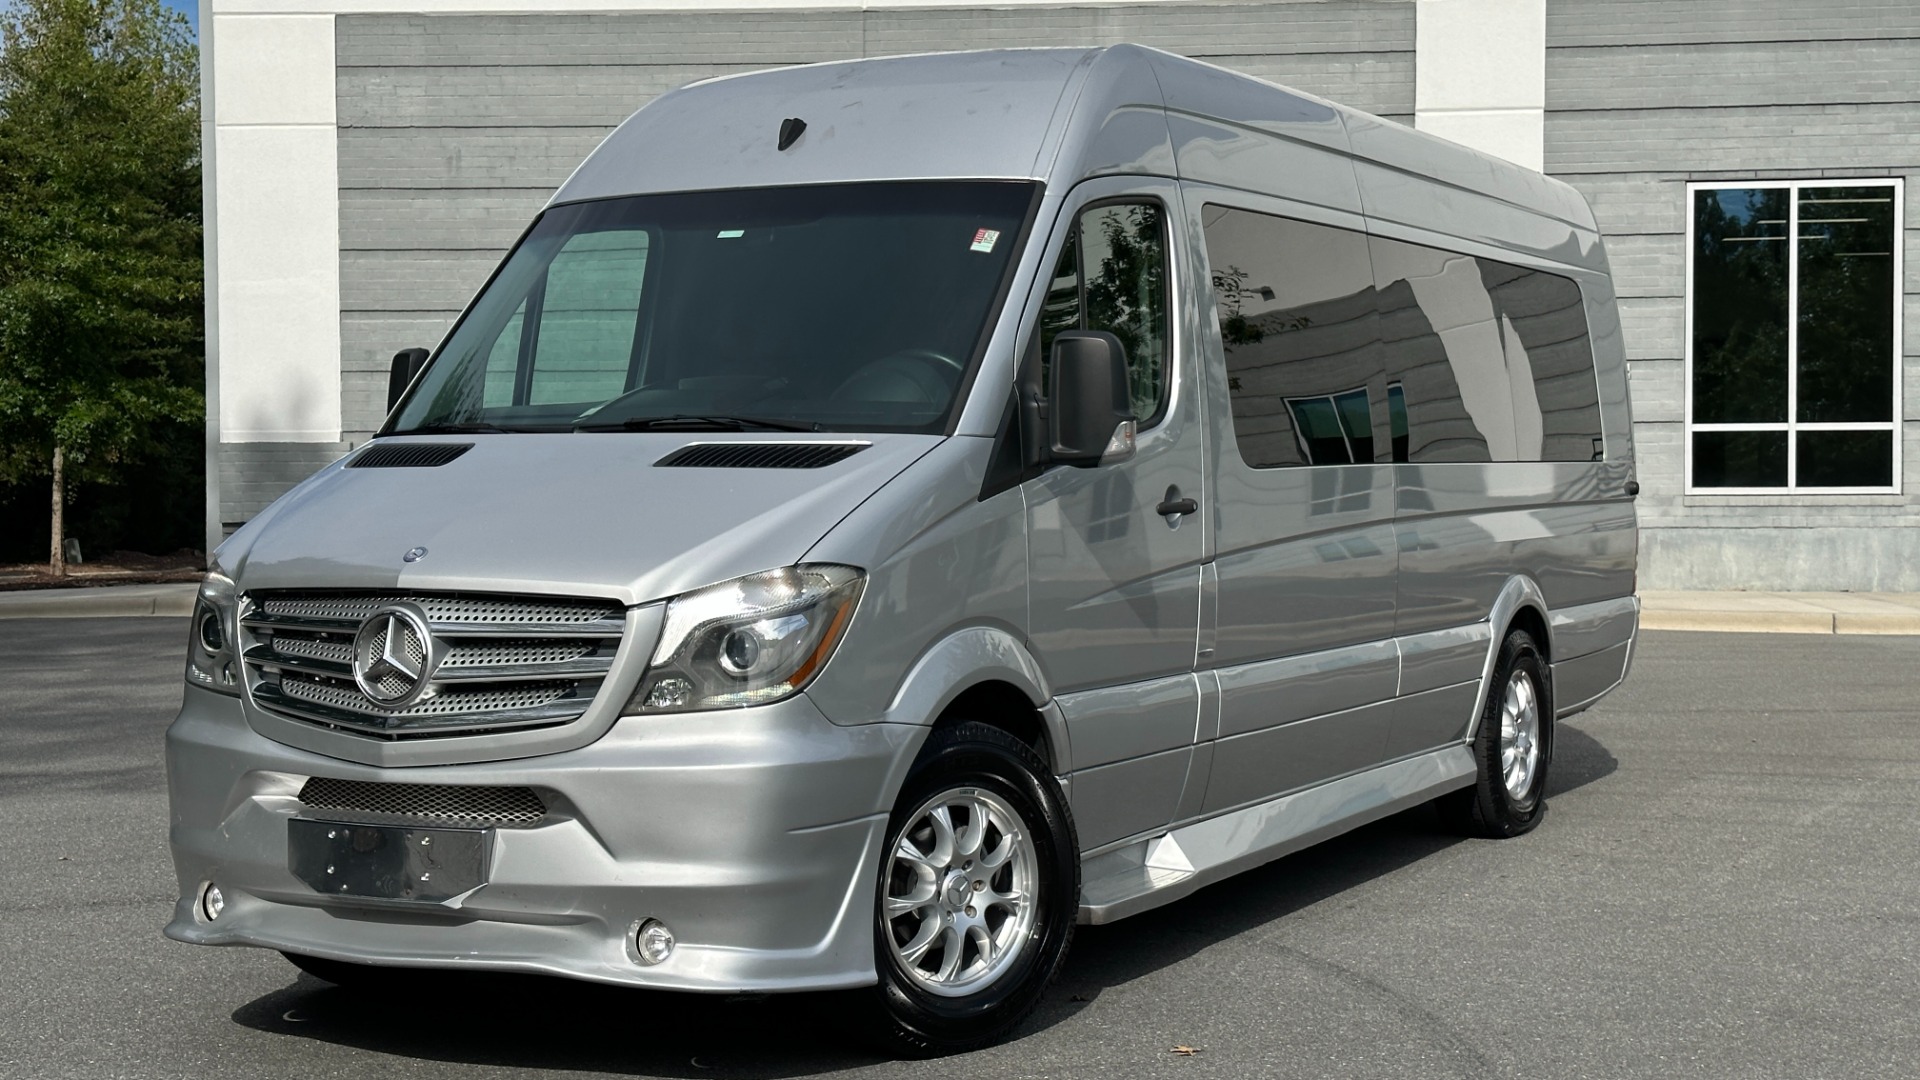 Used 2015 Mercedes-Benz Sprinter Cargo Vans EXT / MIDWEST AUTOMOTIVE DESIGN / LUXURY SPRINTER / TV'S / WIFI / MORE!! for sale $69,999 at Formula Imports in Charlotte NC 28227 2